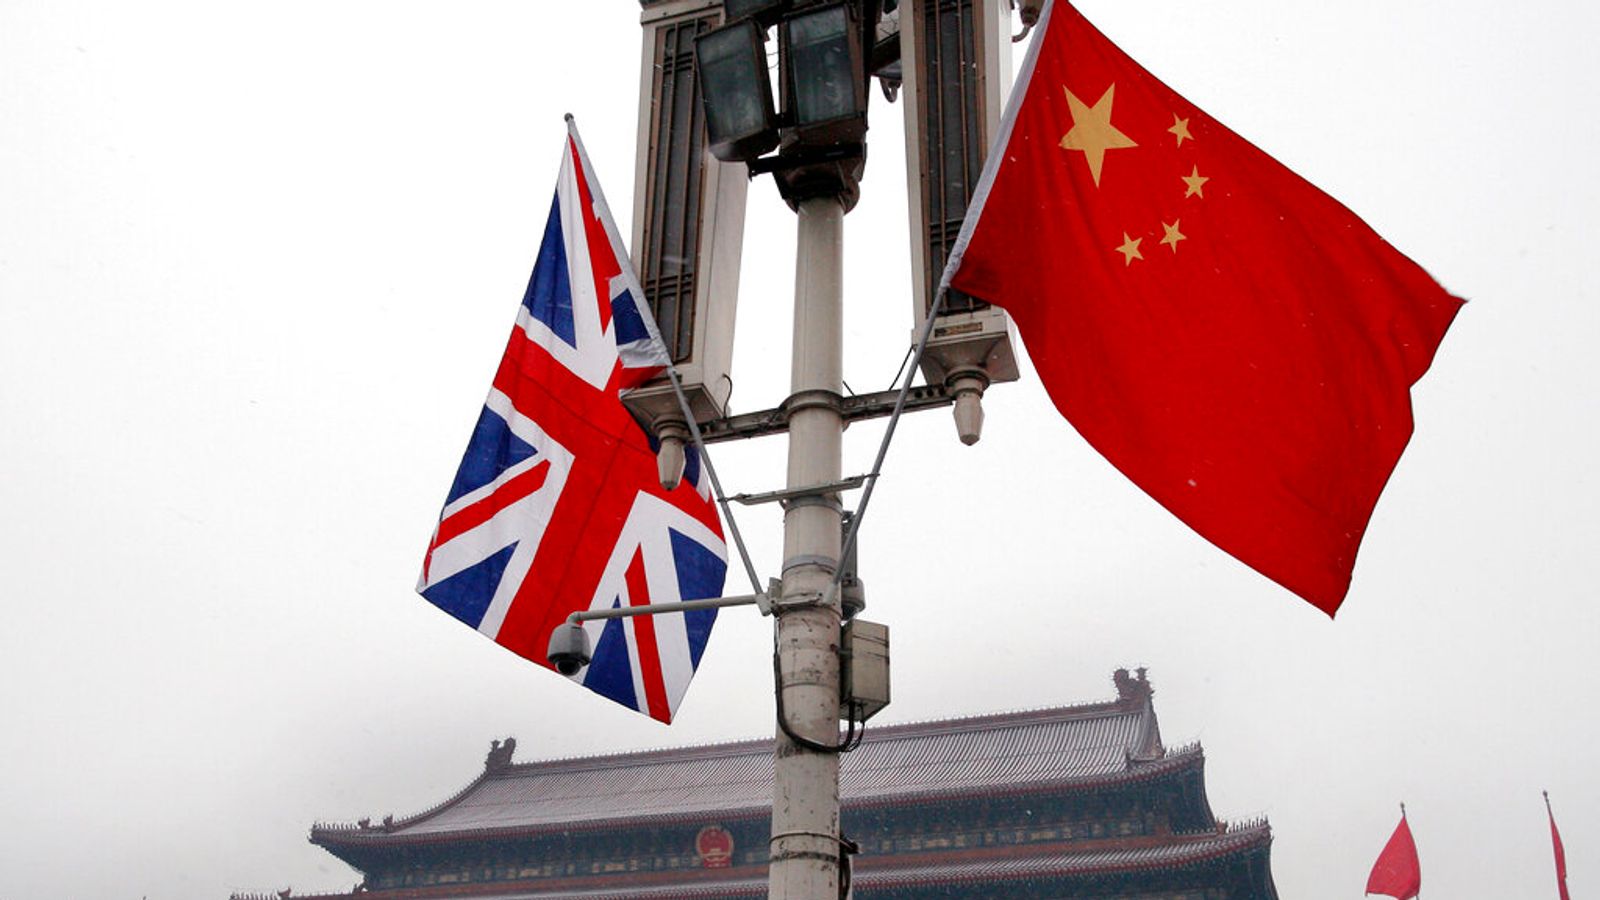 More UK sanctions expected over China democracy and security fears